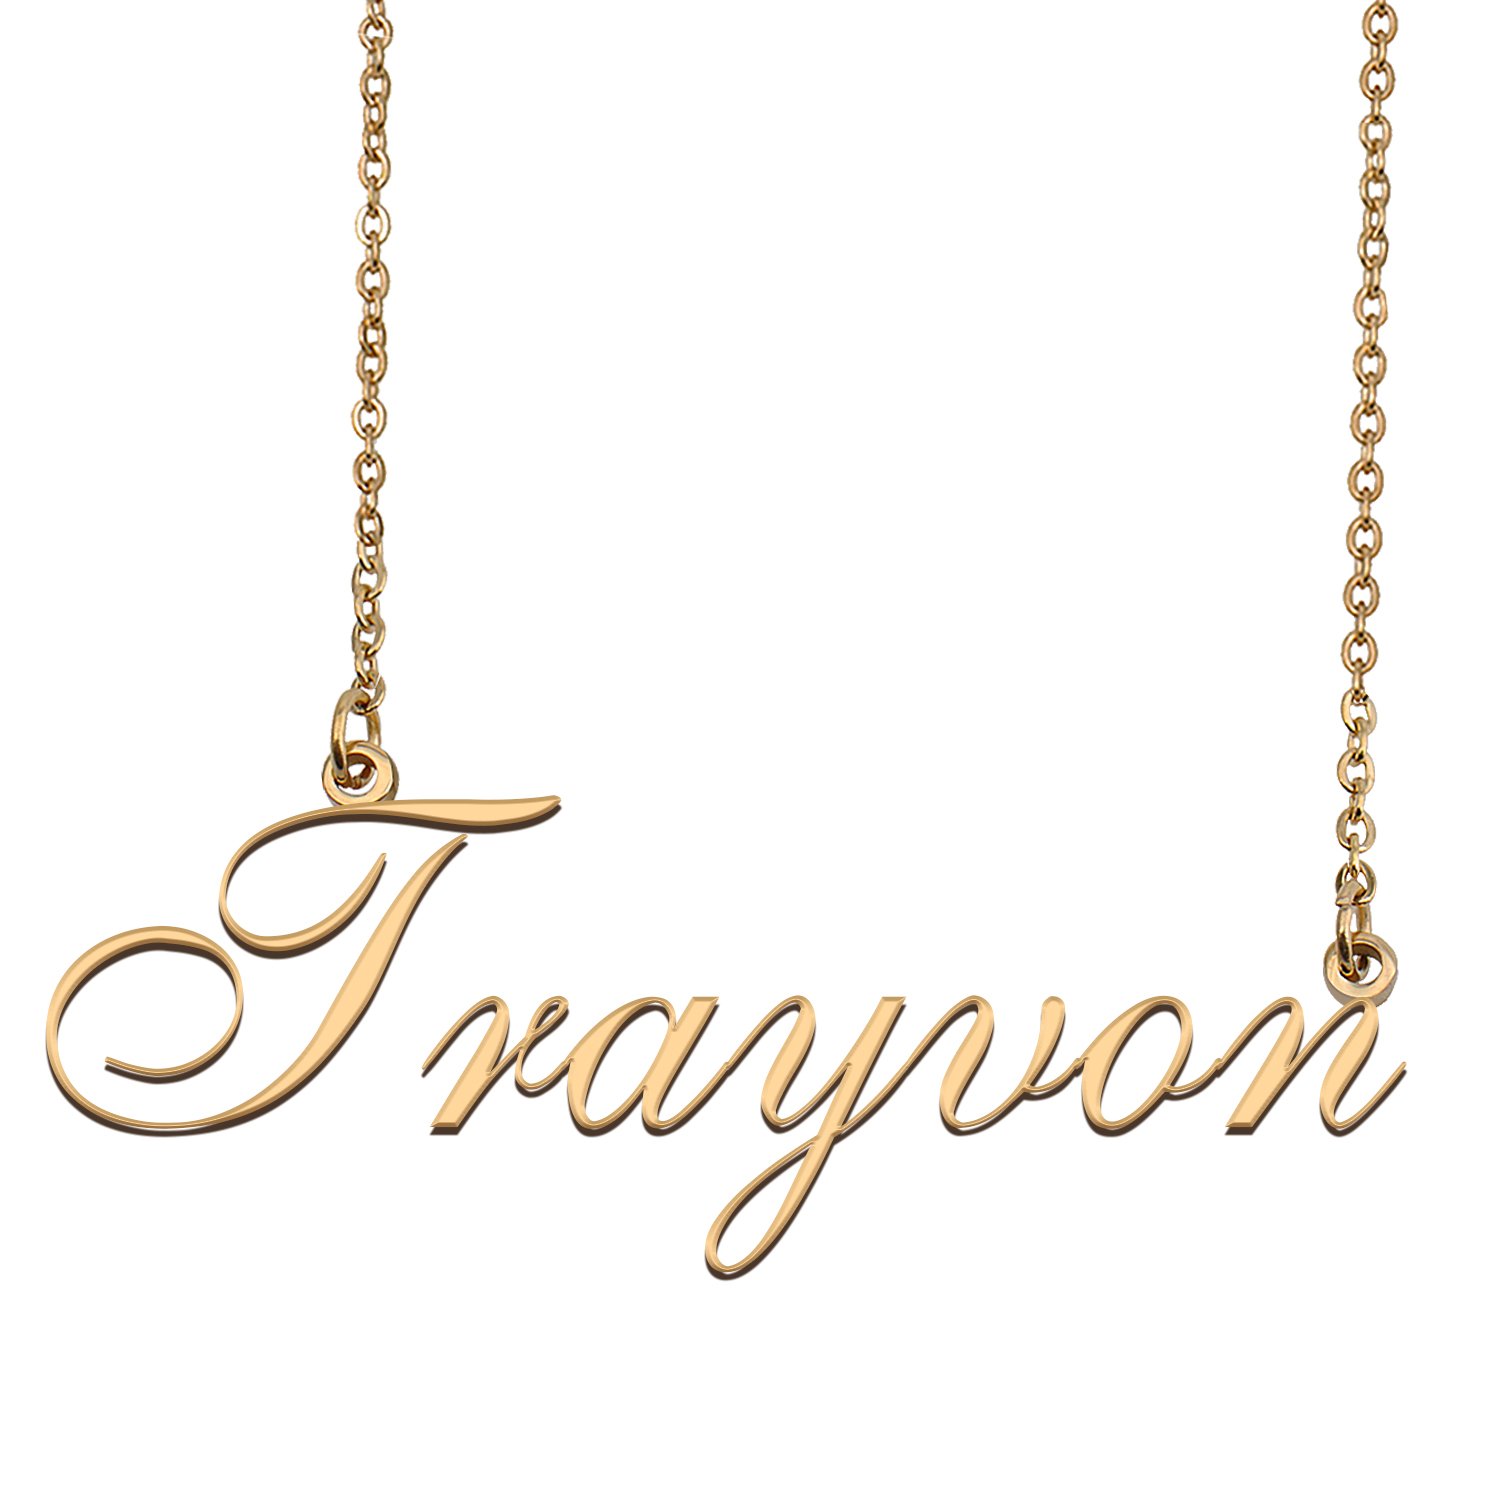 Custom Personalized Name Necklace in Golden Silver for Women Trayvon